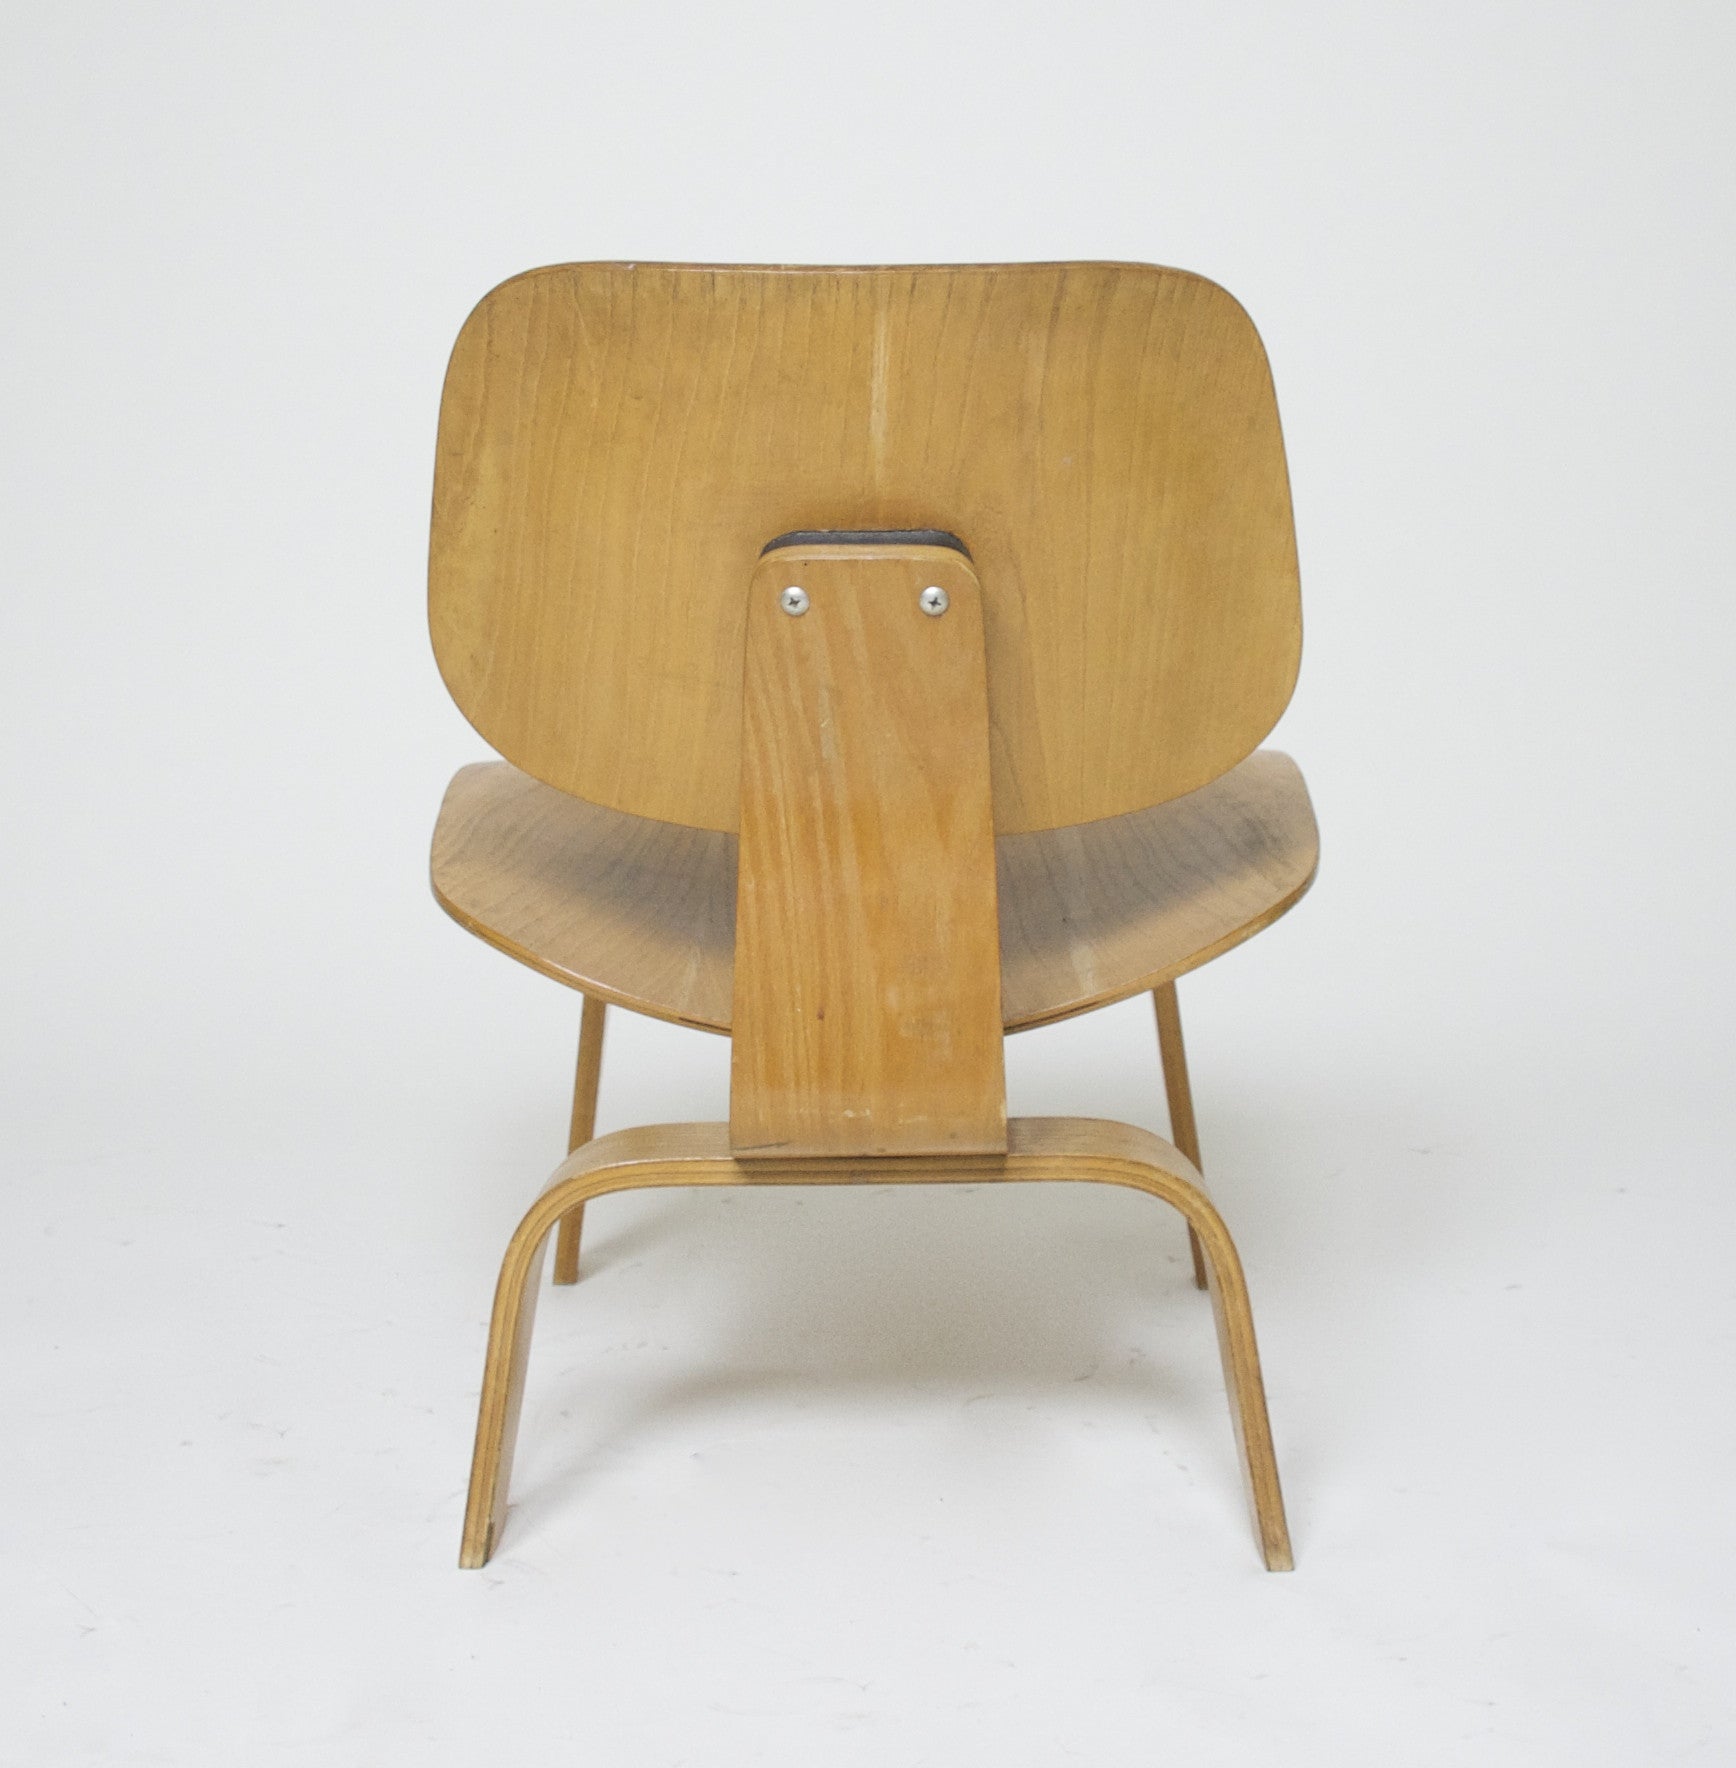 SOLD Eames Evans Herman Miller 1948/49 LCW Early Rare Chair, All Original With Label